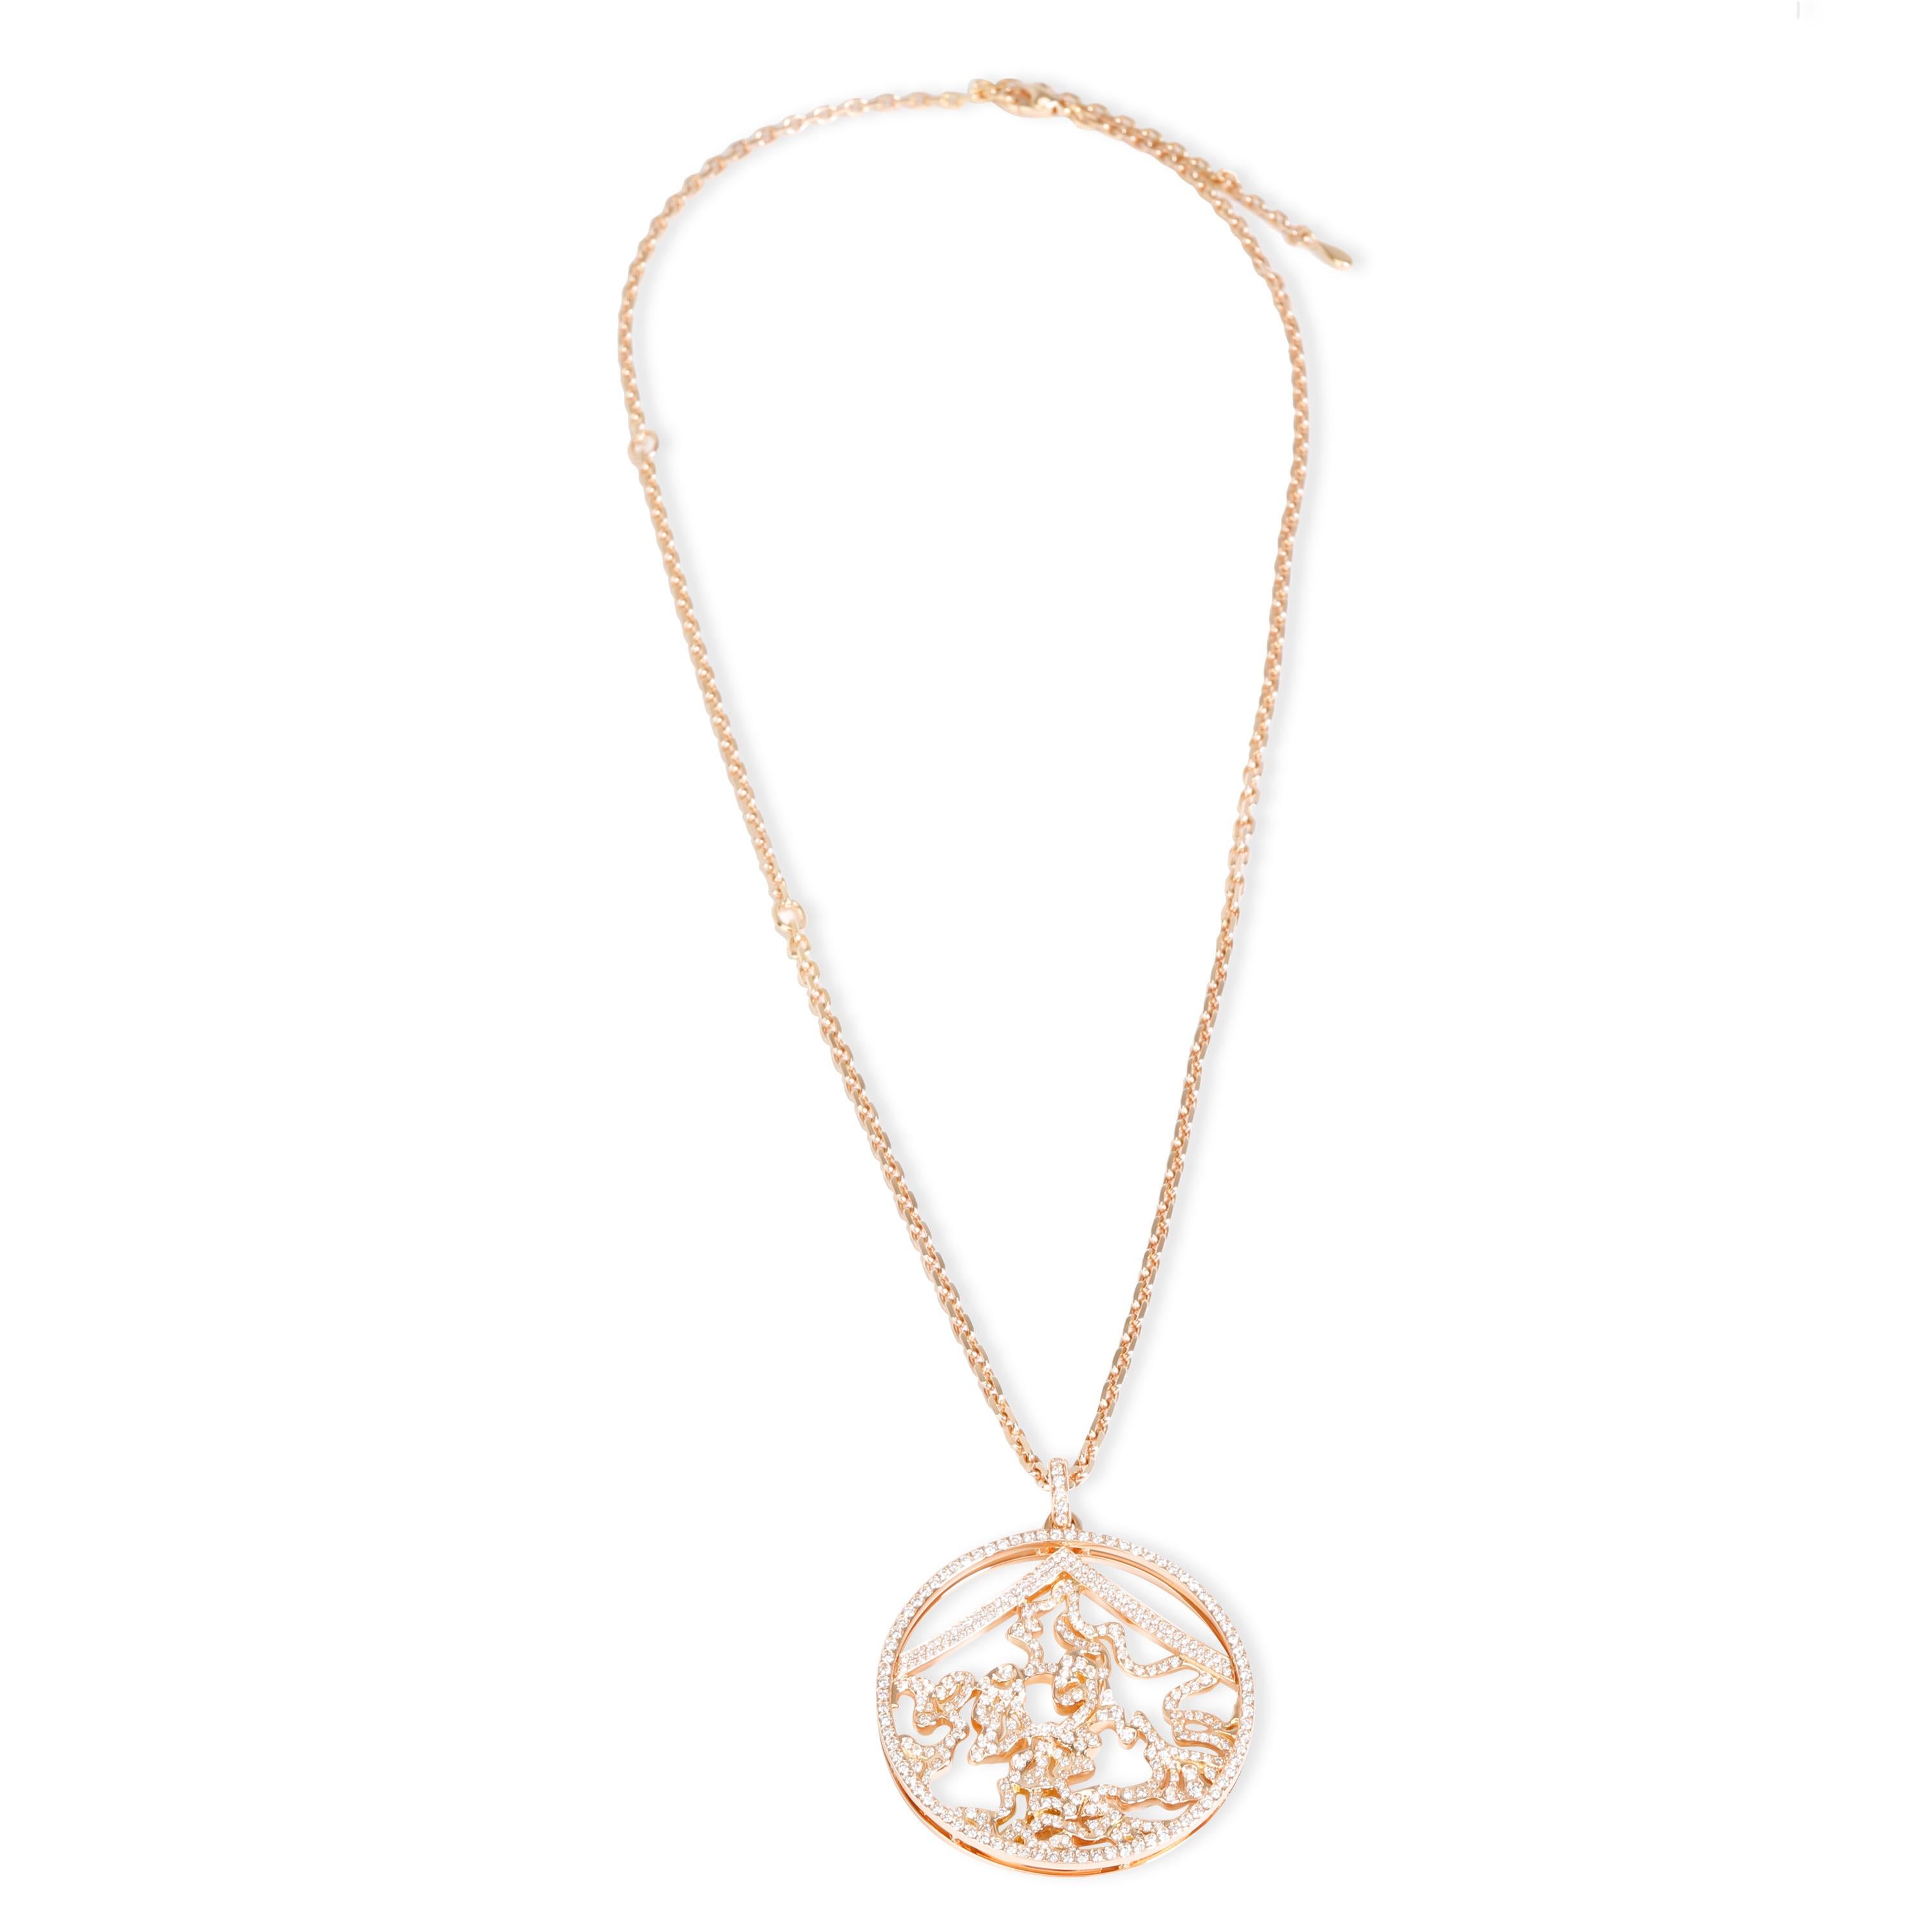 Repossi Pave Diamond Circle Pendant in 18K Rose Gold 2.9 CTW

PRIMARY DETAILS
SKU: 098460
Listing Title: Repossi Pave Diamond Circle Pendant in 18K Rose Gold 2.9 CTW
Condition Description: Retails for 25600 USD. In excellent condition and recently